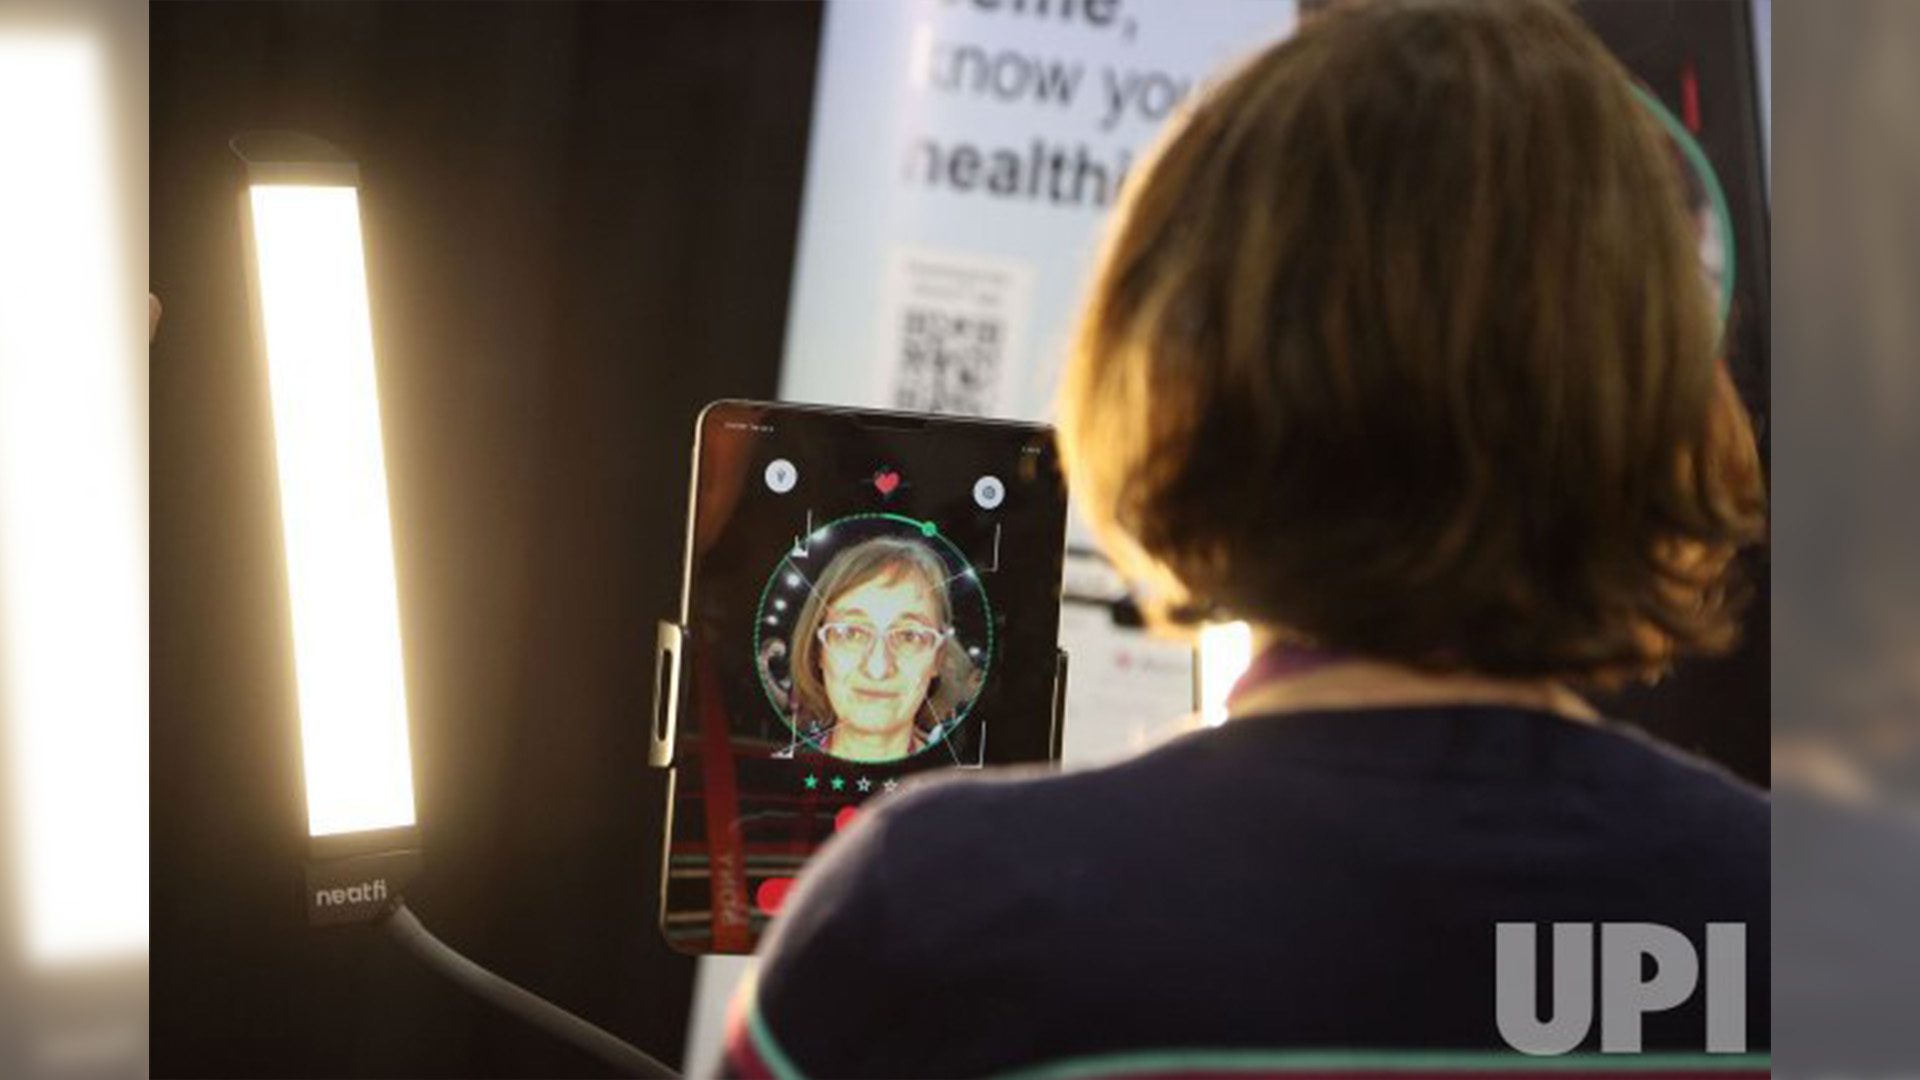 CES 2023 attendee takes a selfie using the Anura health app